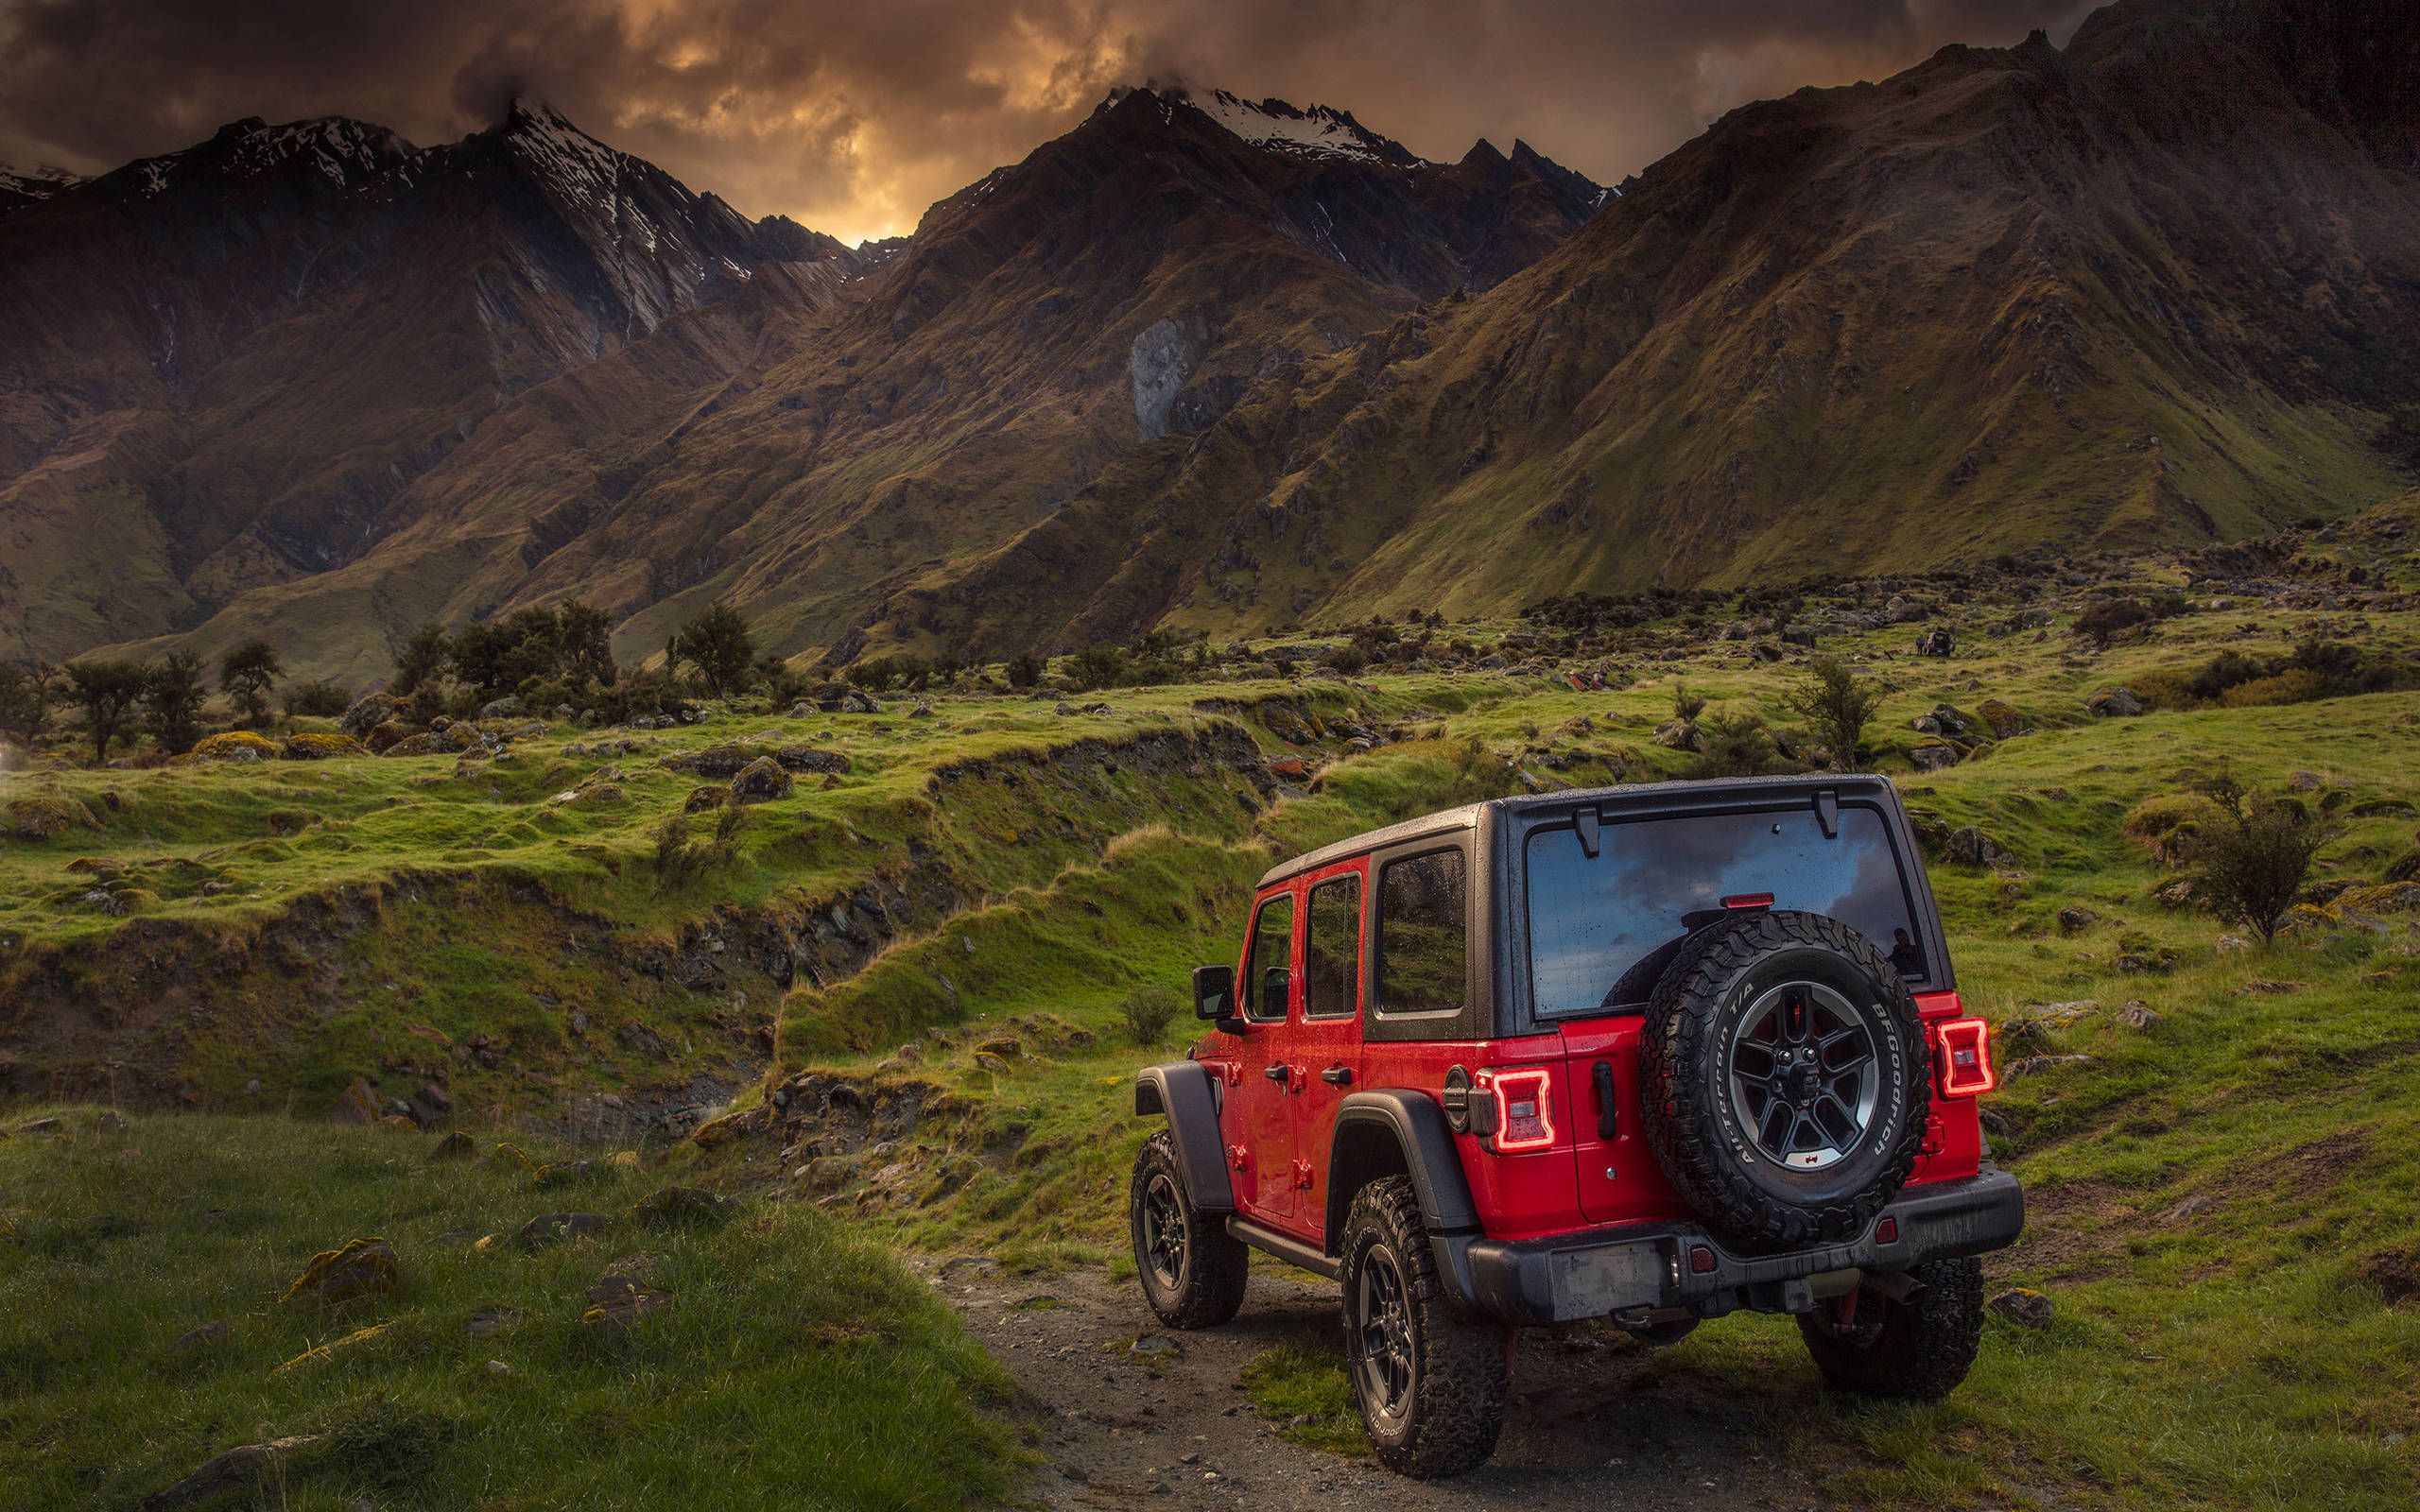 Jeep Wrangler JK production ends this week